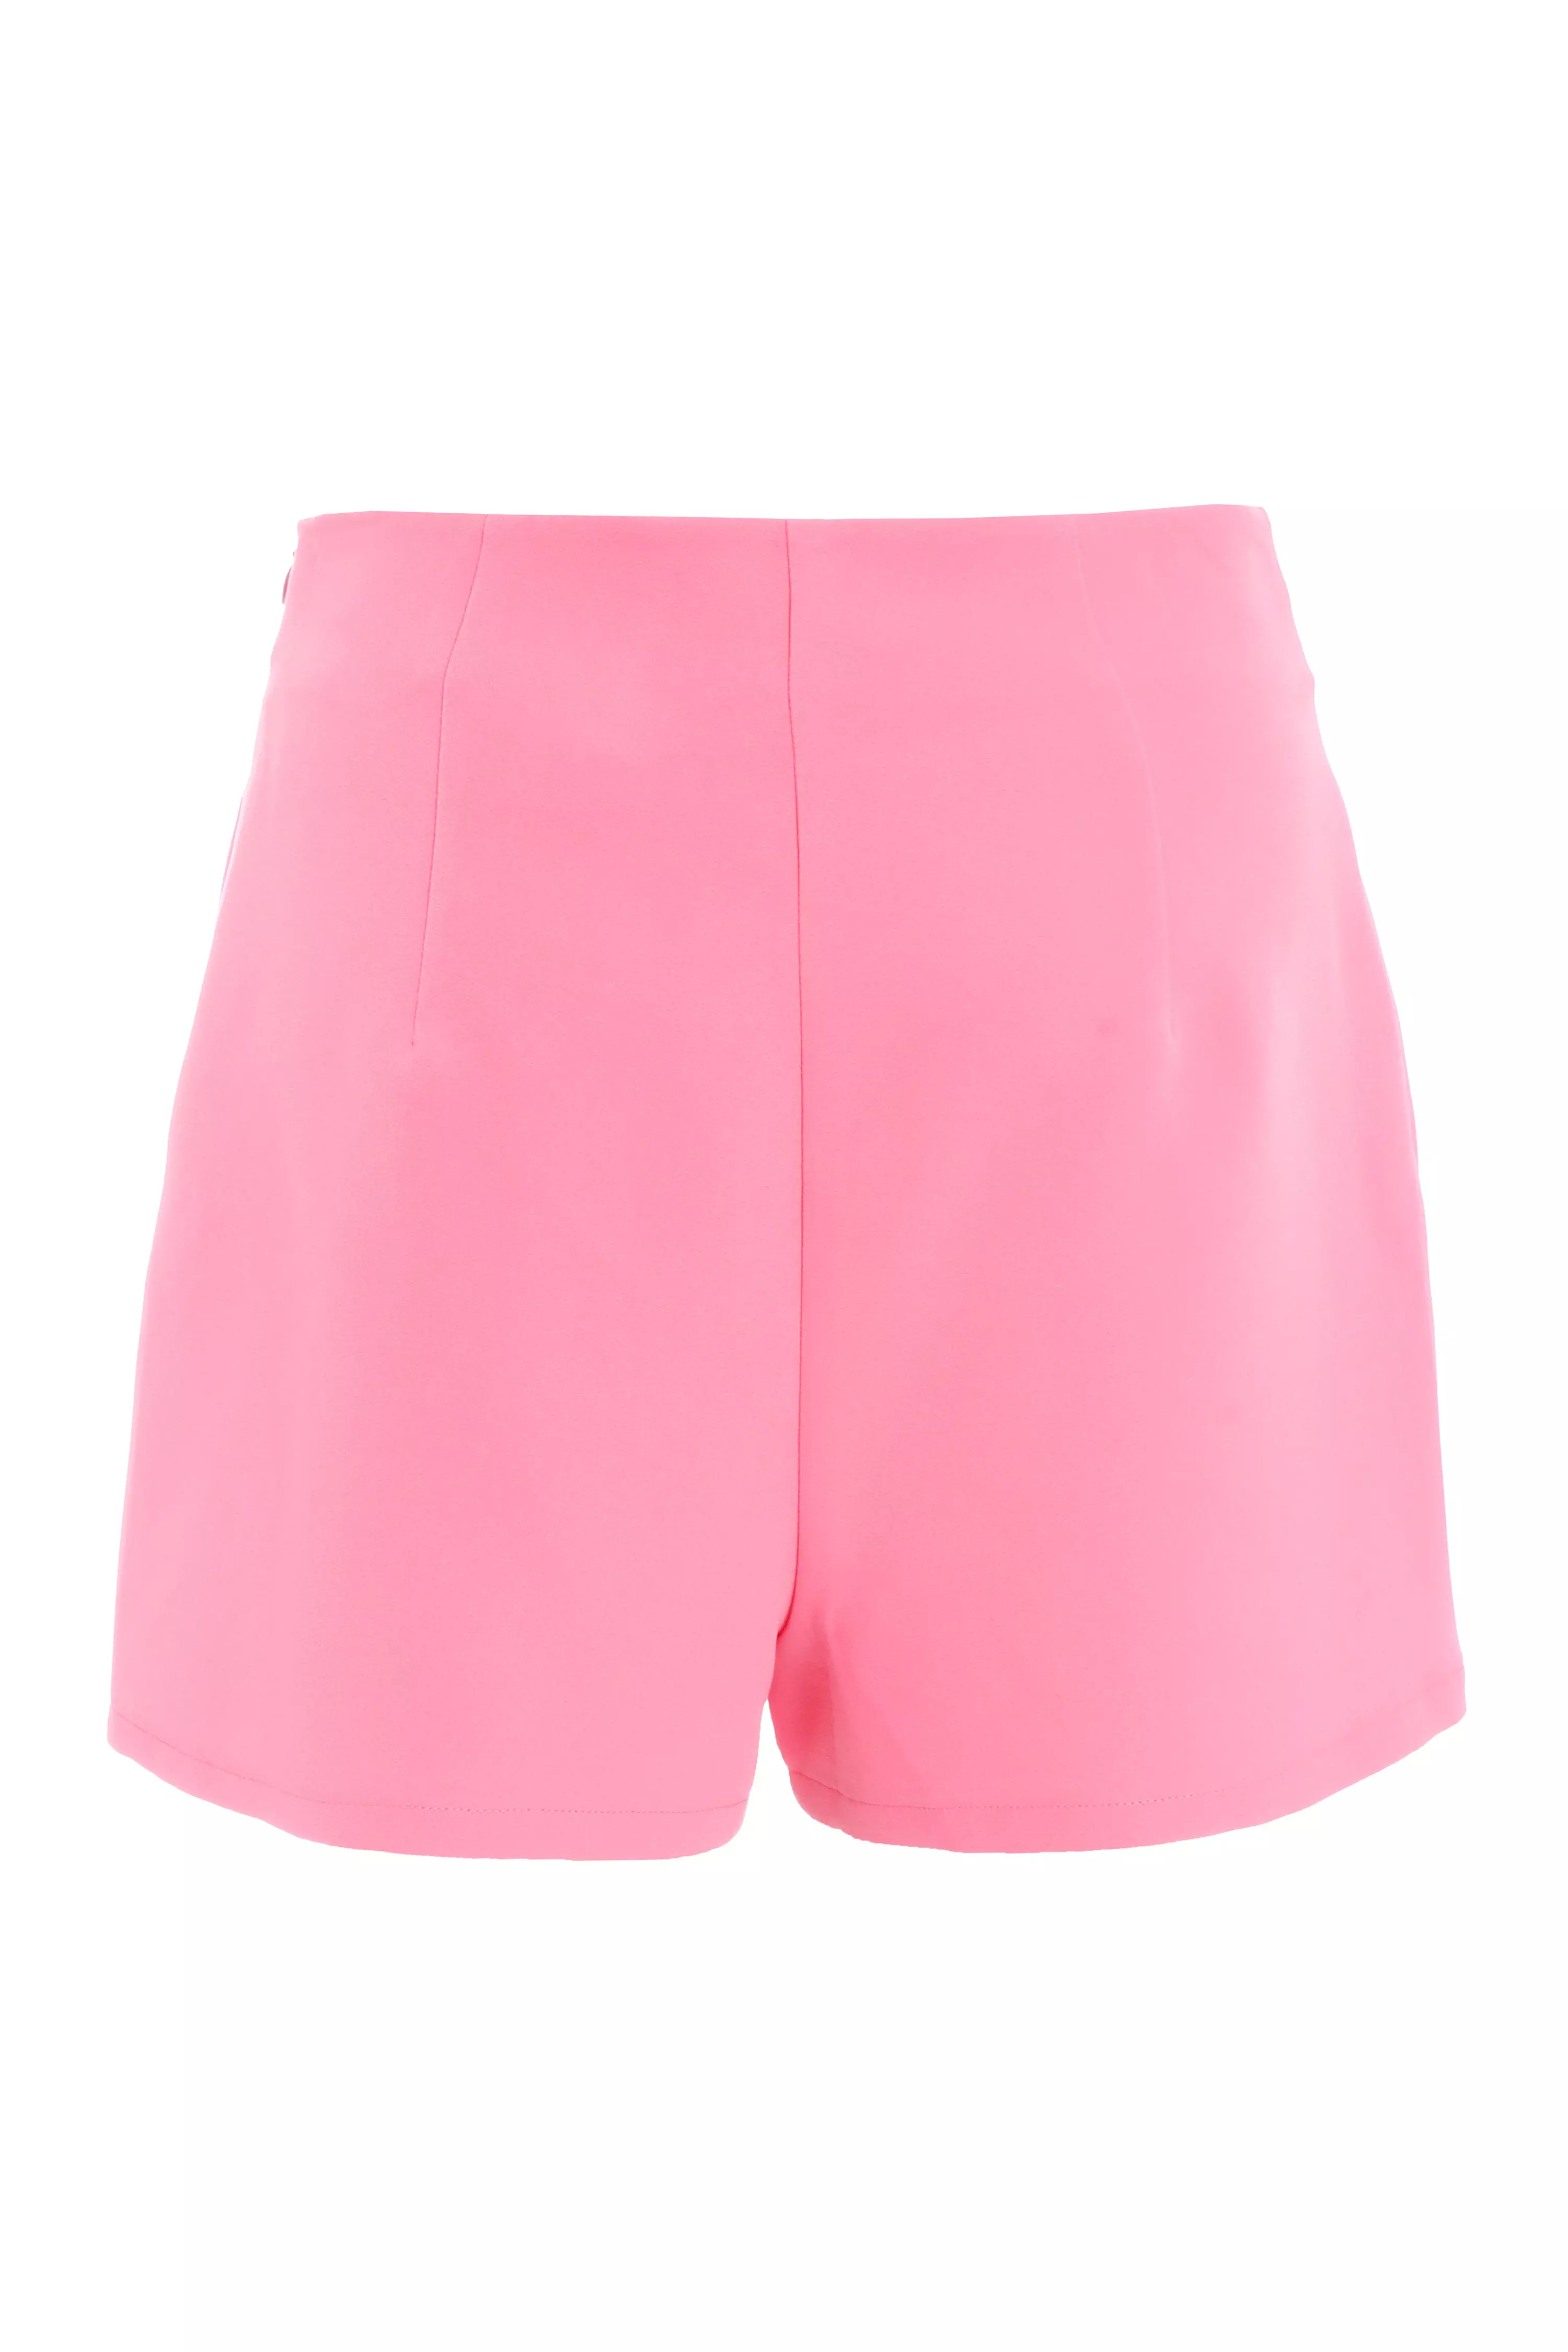 Pink Button Tailored Shorts - QUIZ Clothing